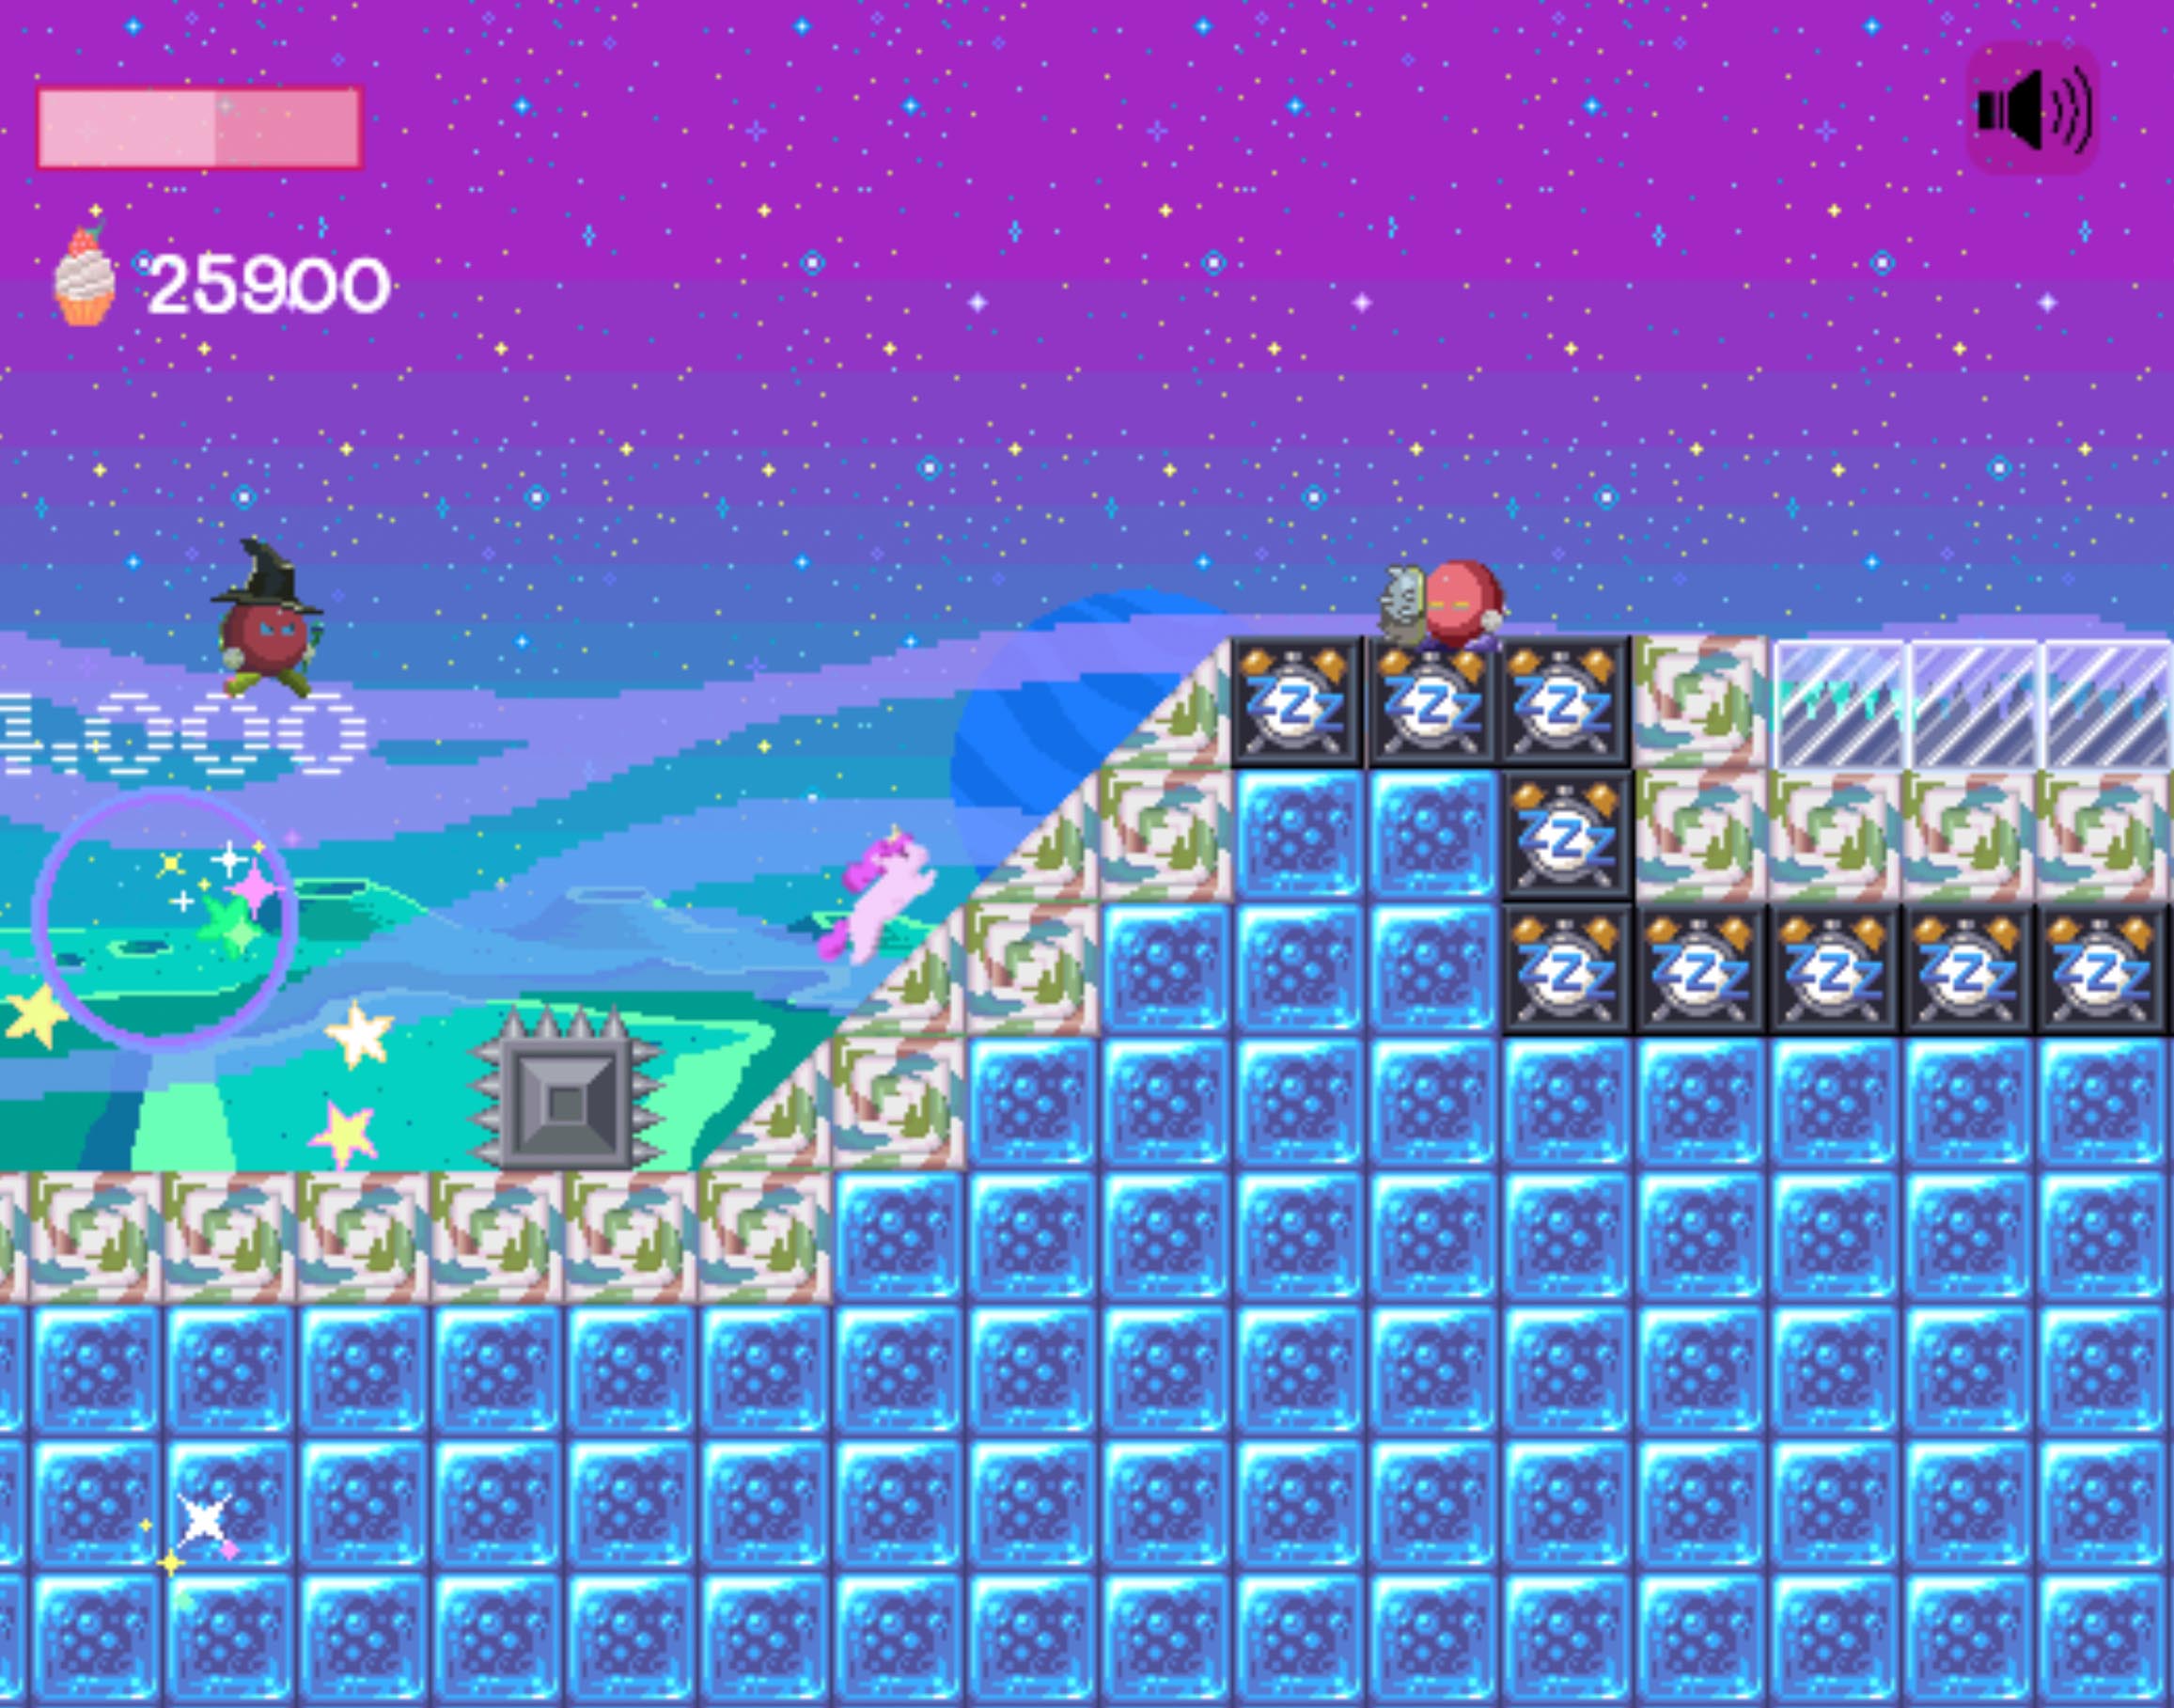 This is a screenshot from Idiom Unicorn. The player is climbing up the hill in a space level and headed toward trouble.